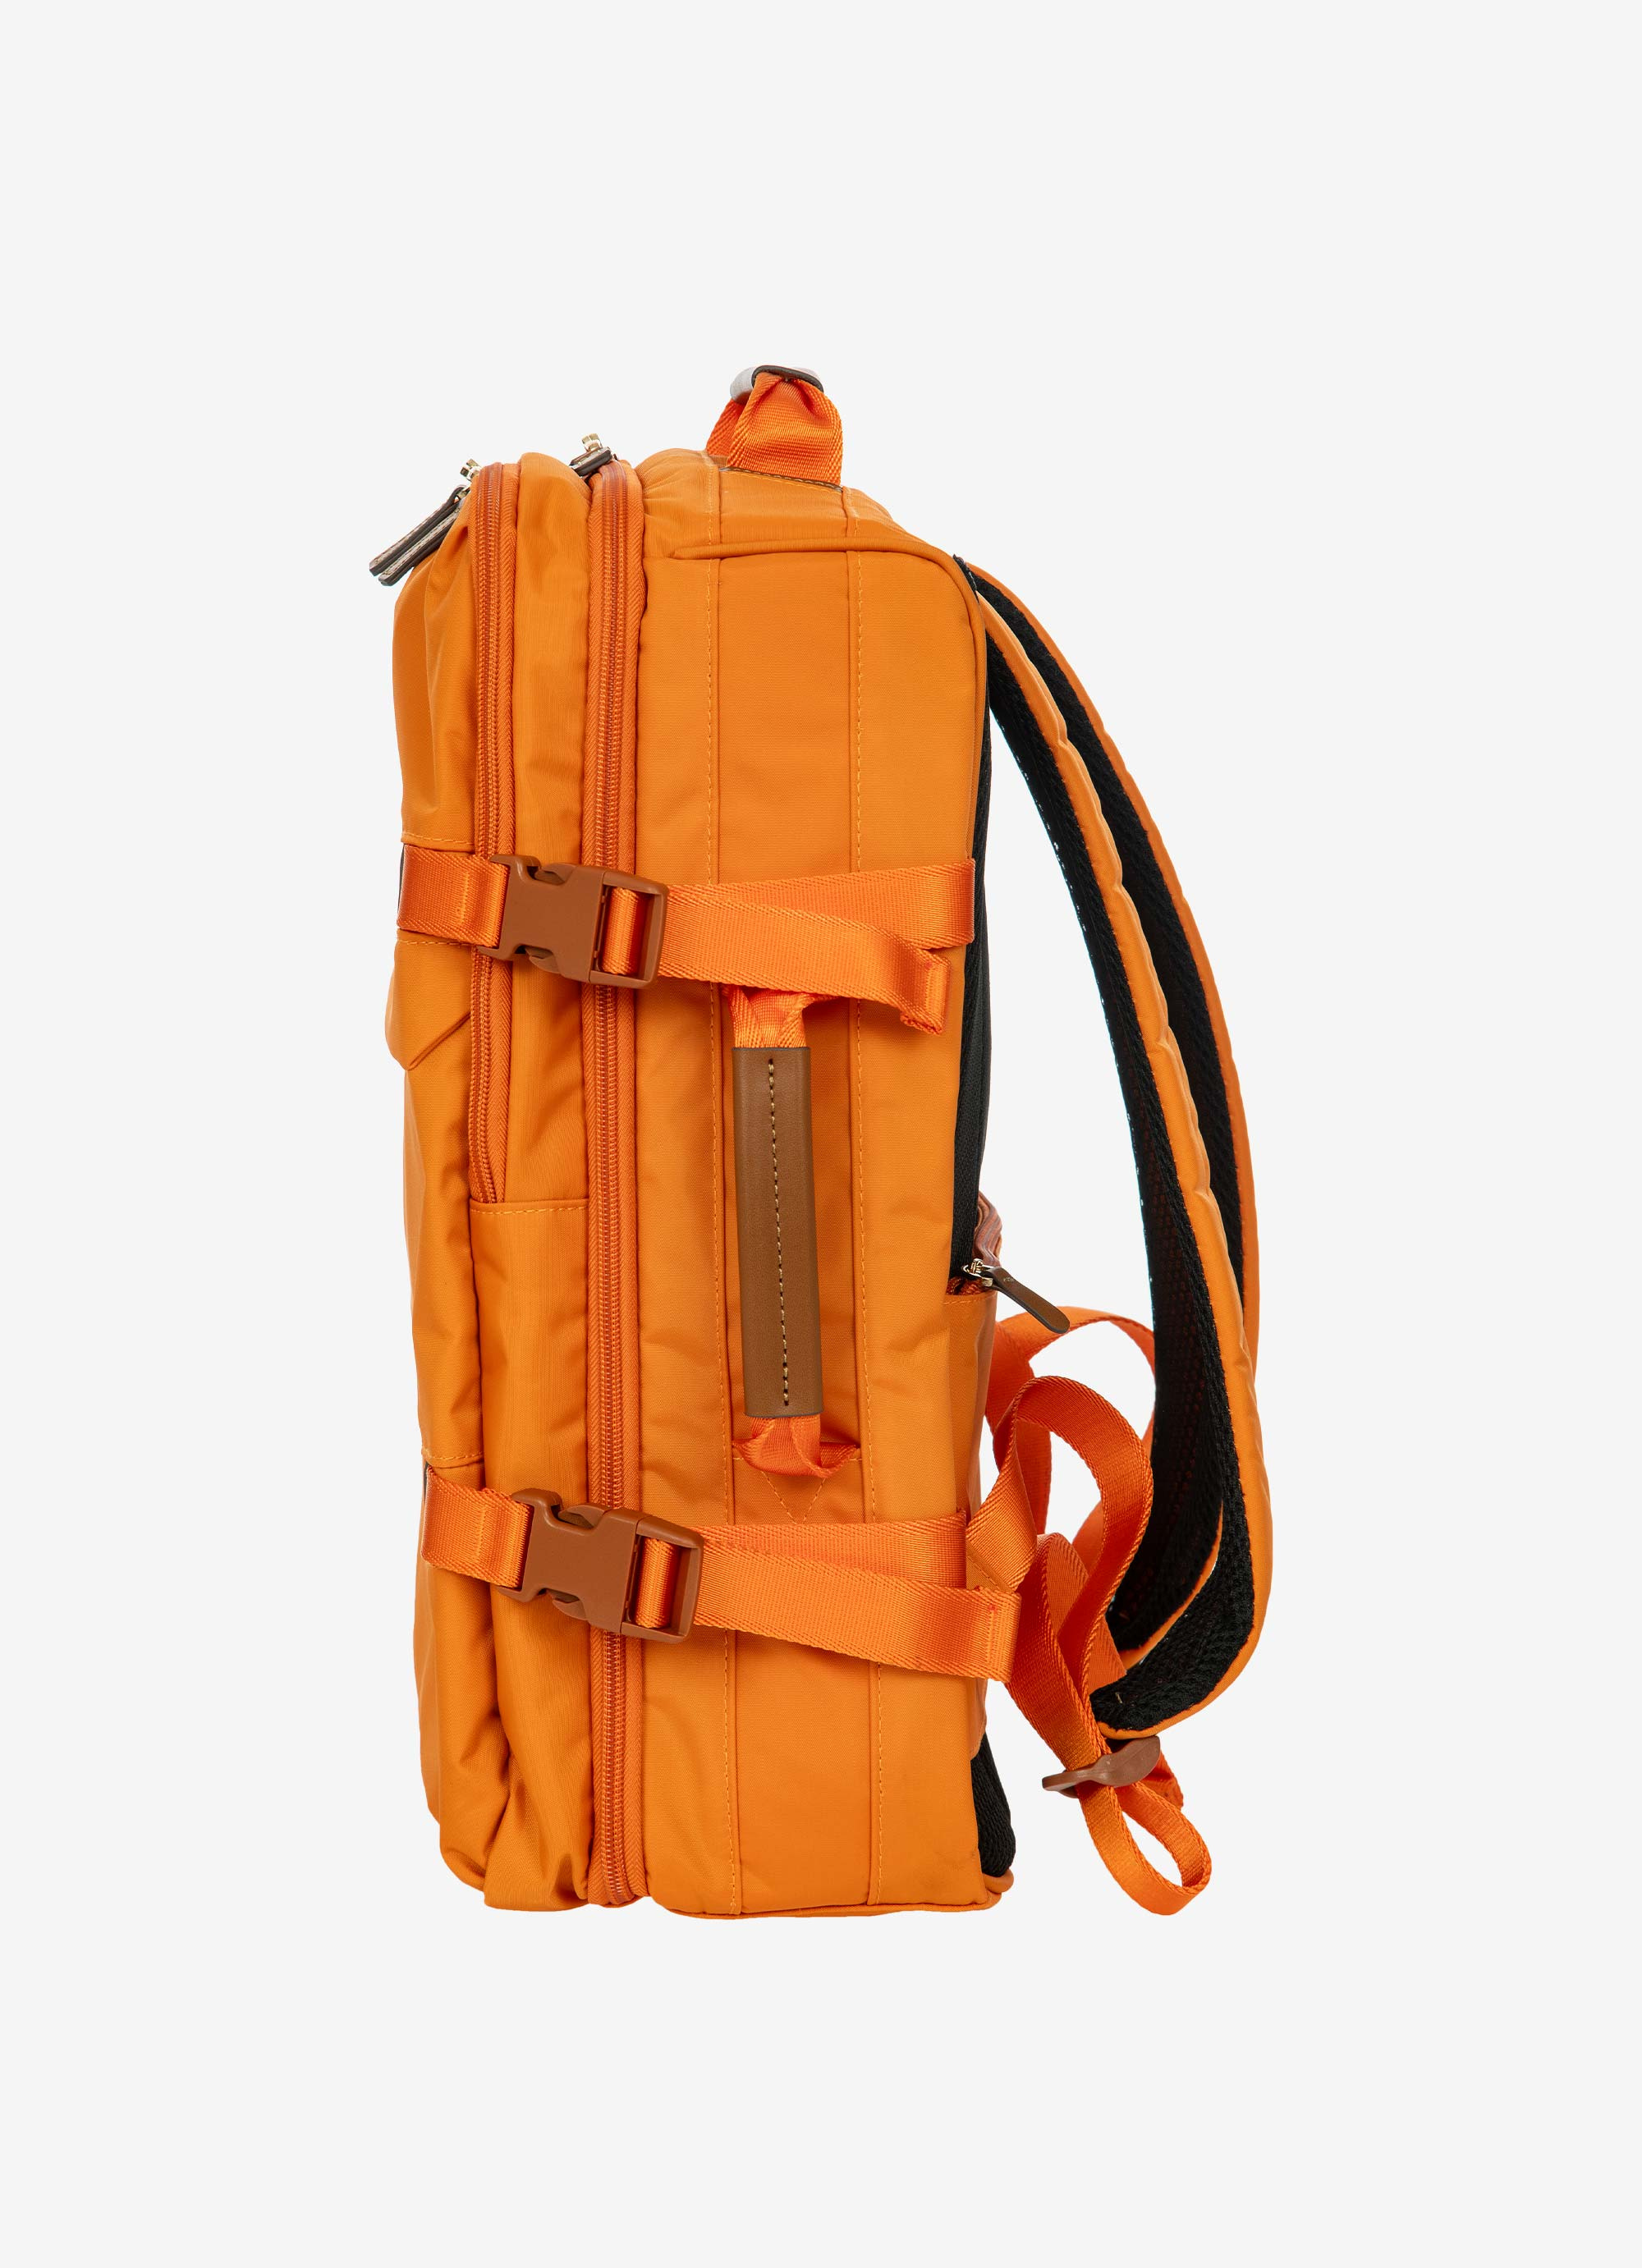 Bric's X-Travel backpack